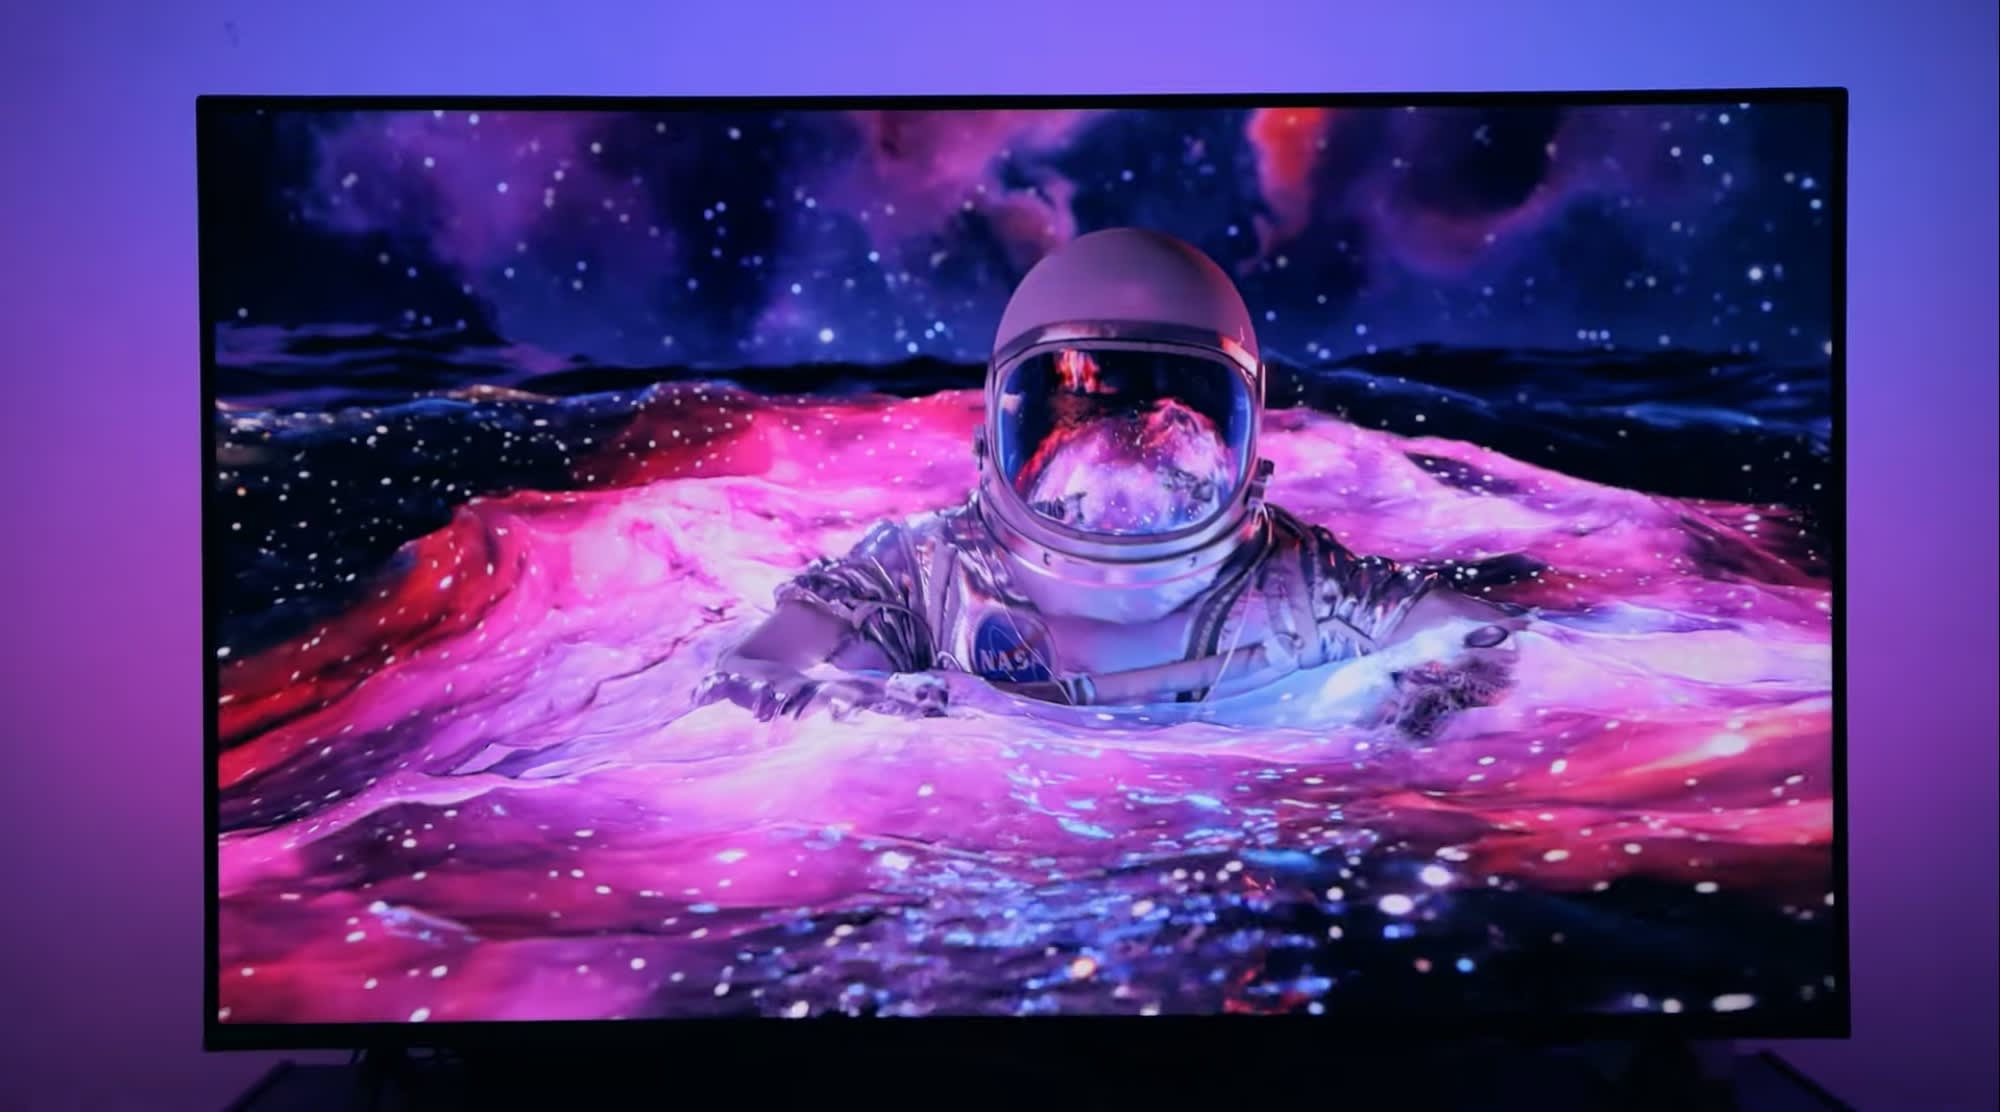 Philips Ambilight TV Review & Demo - Amazing Immersive Colors! 